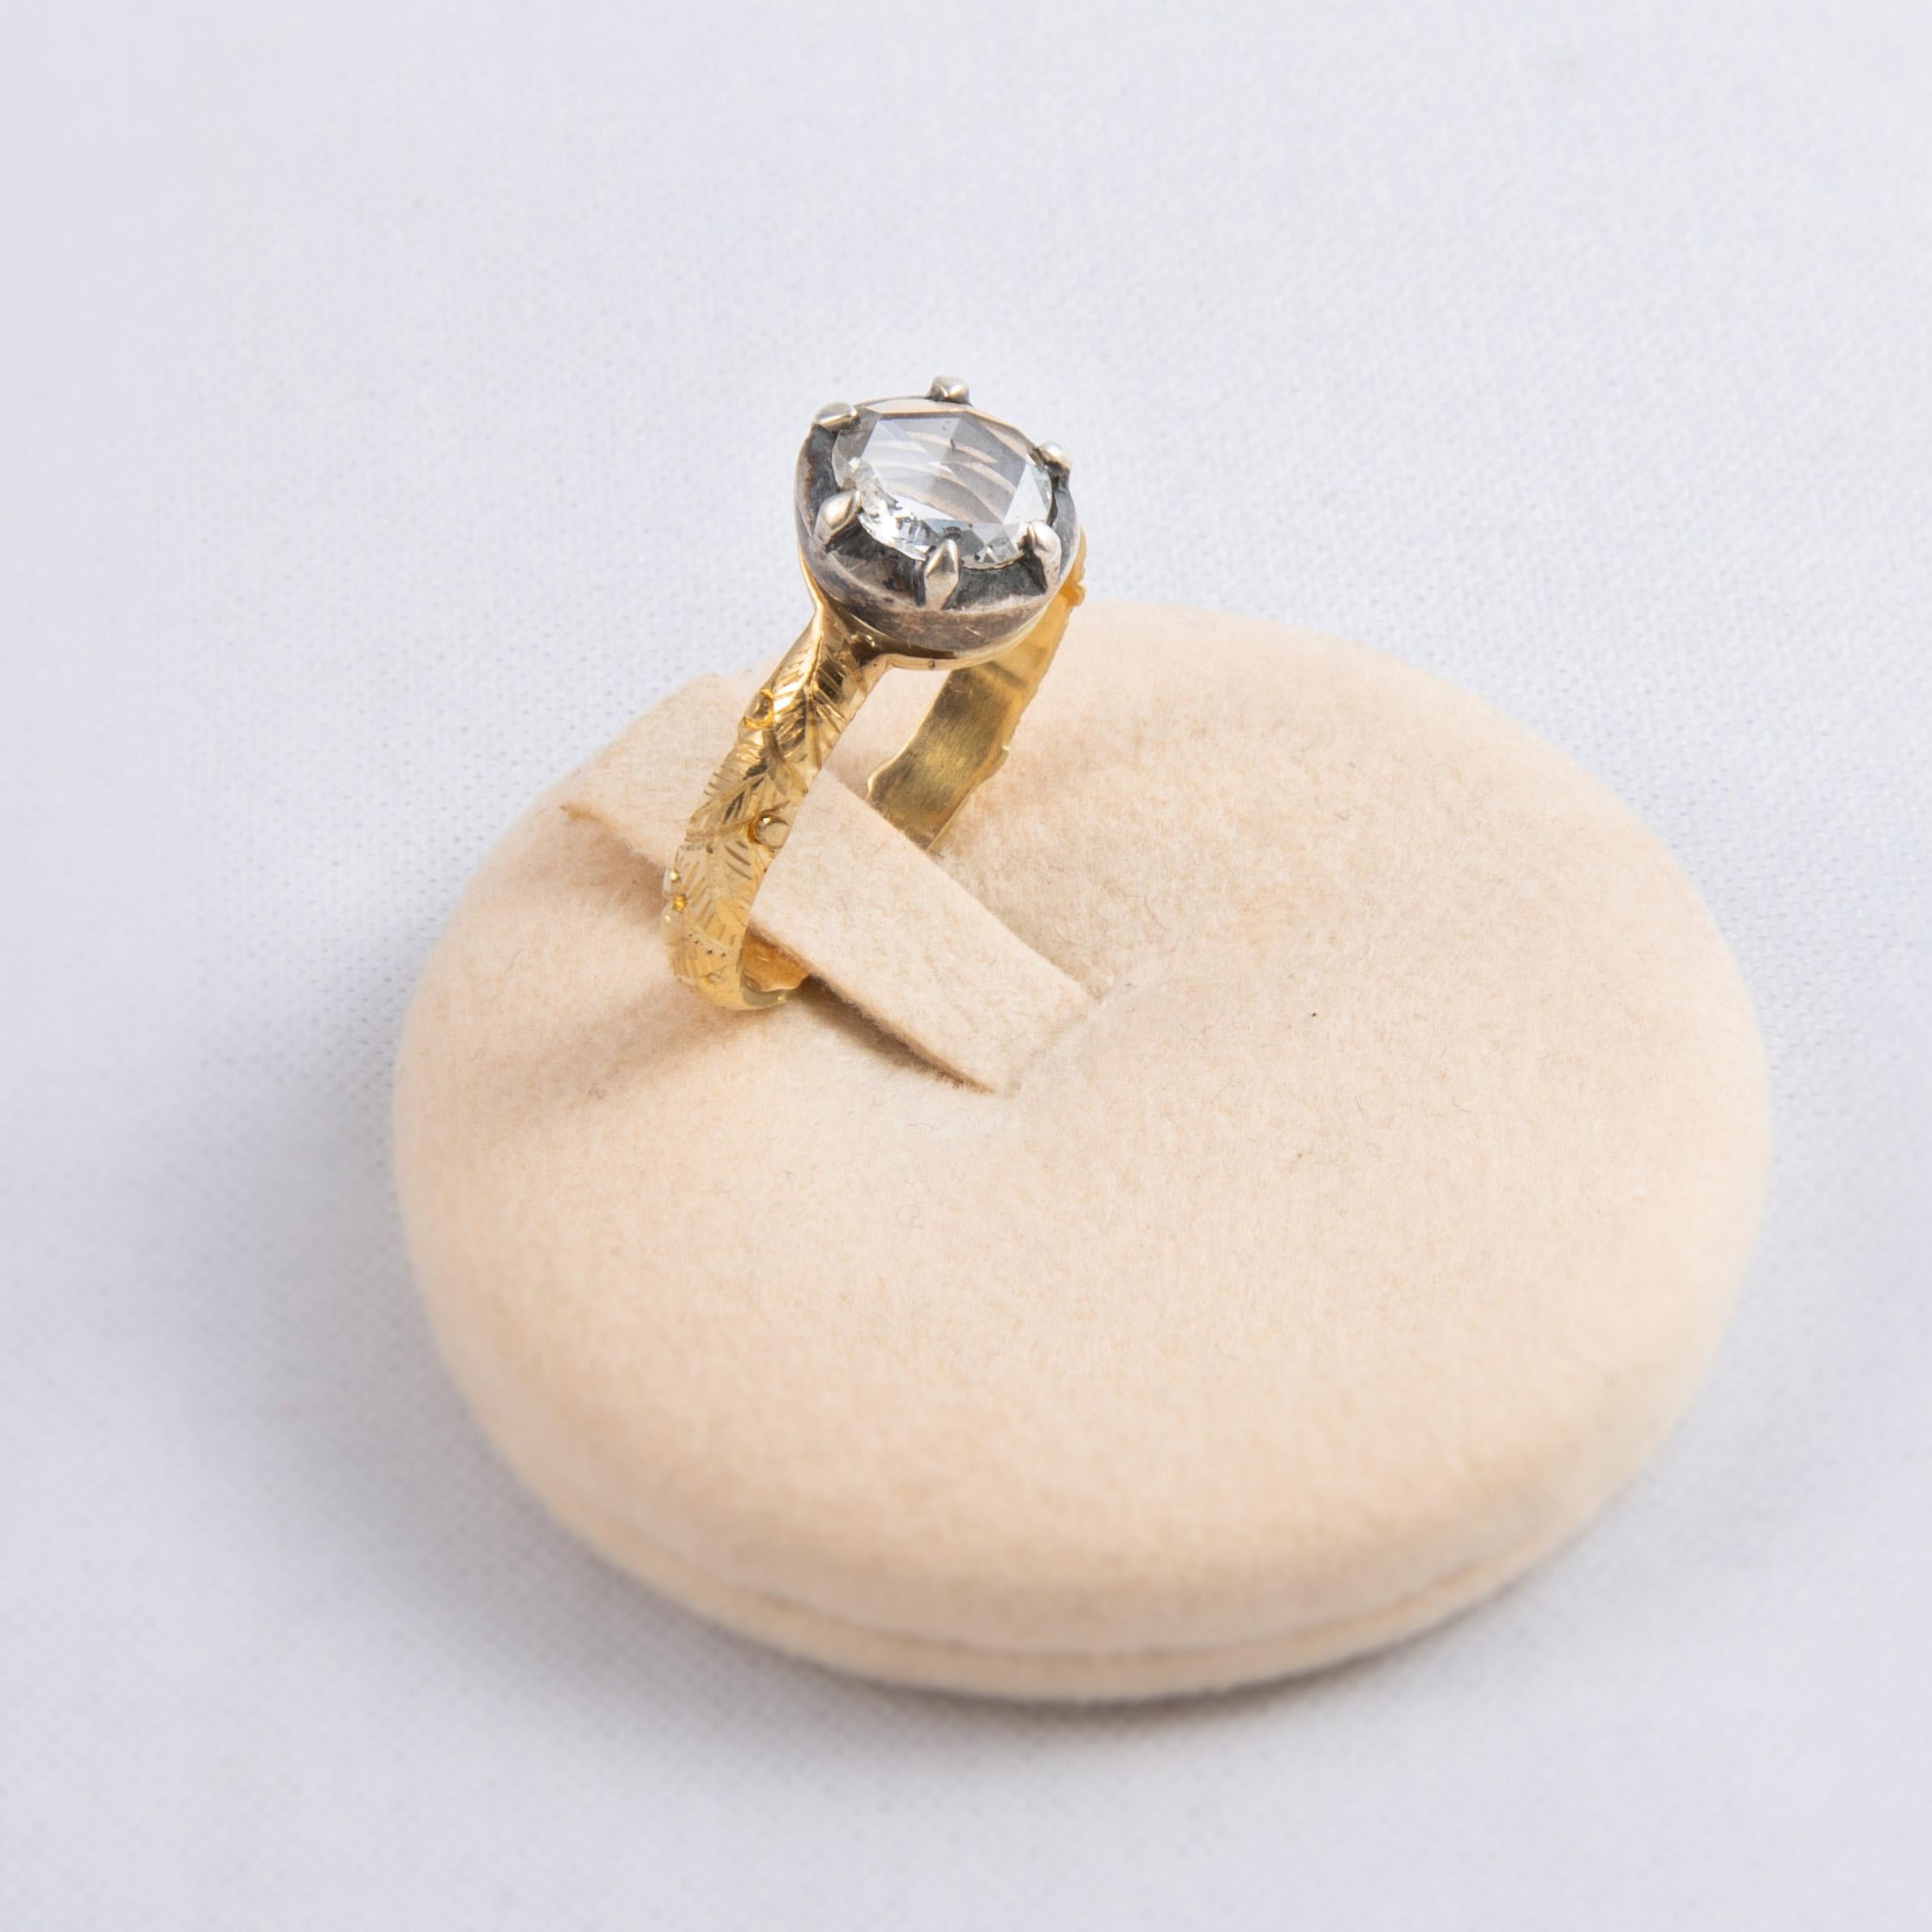 Diamond Ring in 18k gold, engraved stem with a 0,70 ct rose set on silver.
Italian Size 13.